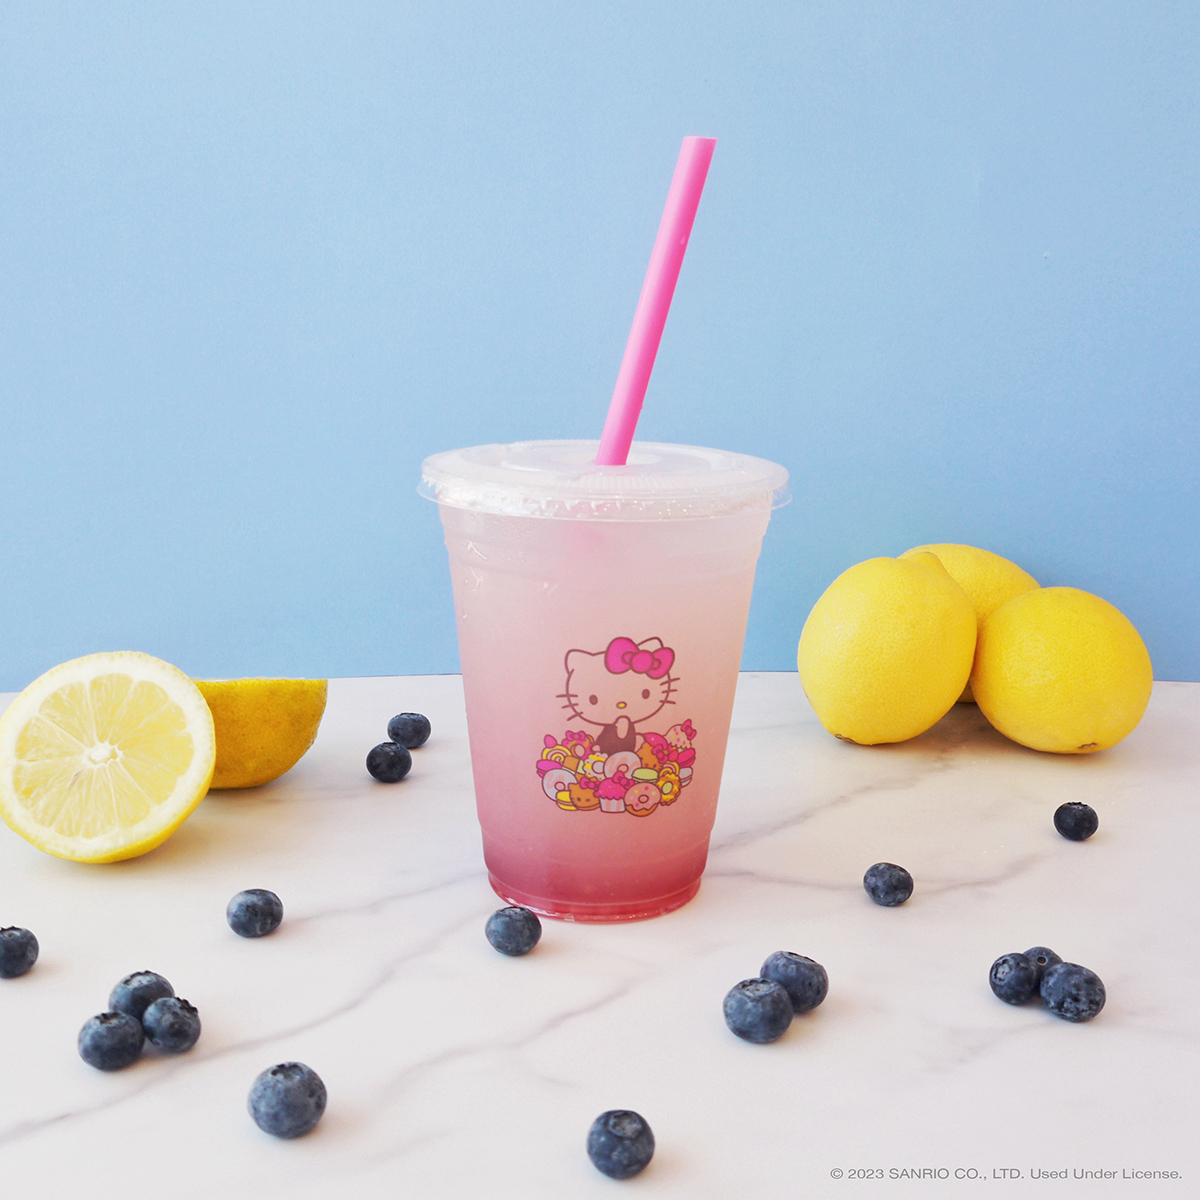 Sip into the last days of summer! ☀️ Try our seasonal Blueberry Lemonade 🍋🫐 available now at our Hello Kitty Grand Cafe location.